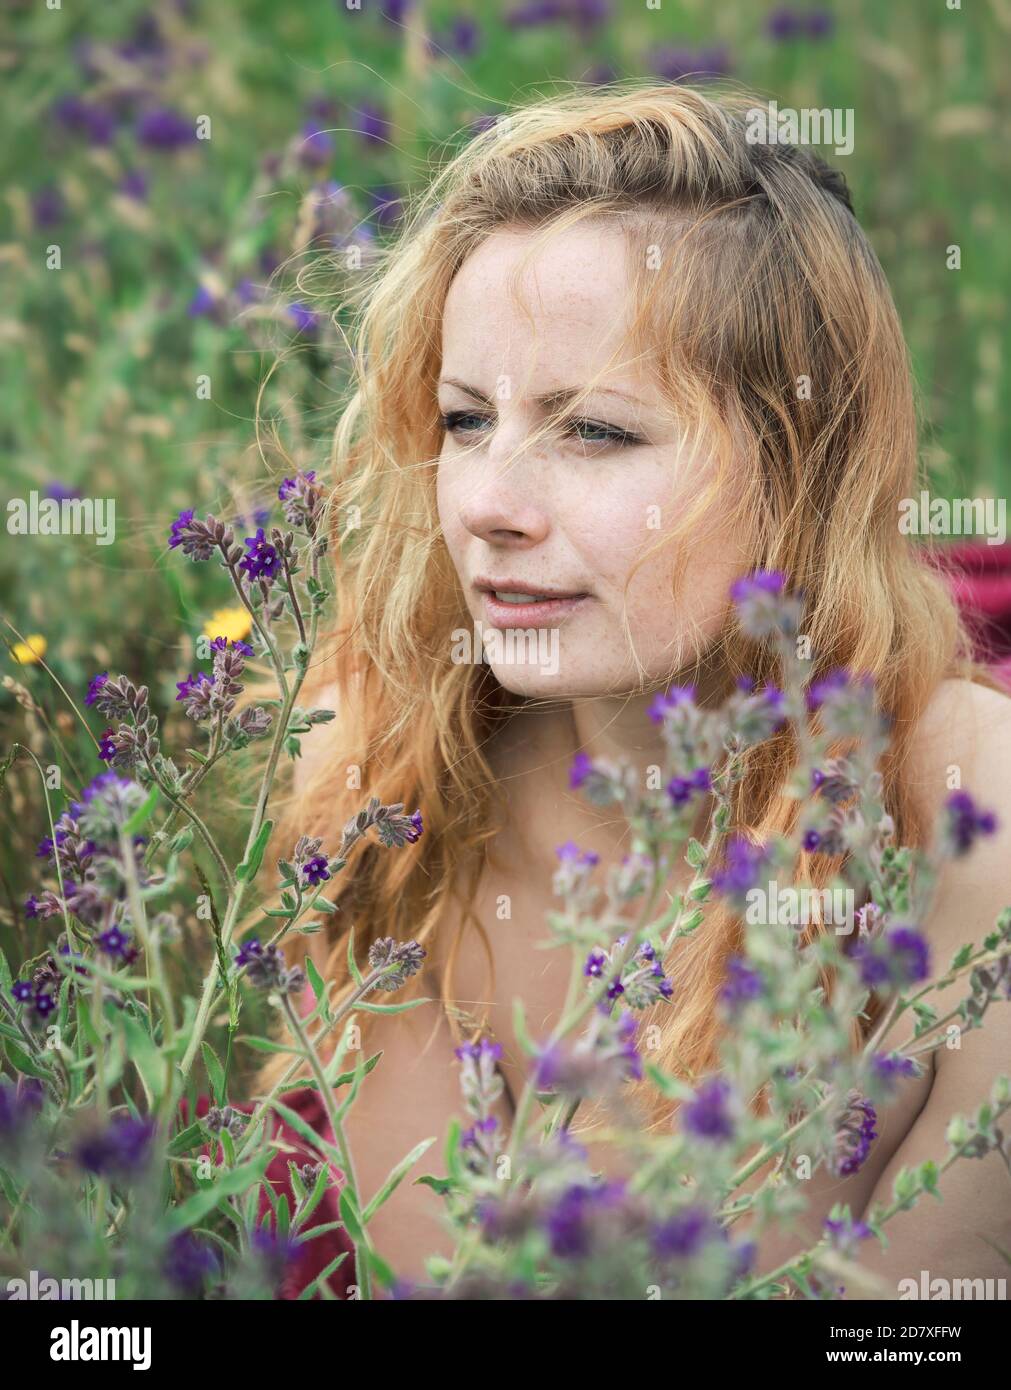 Artistic portrait of freckled woman on natural background. Young woman enjoying nature among the flowers and grass. Close up summer portrait Stock Photo